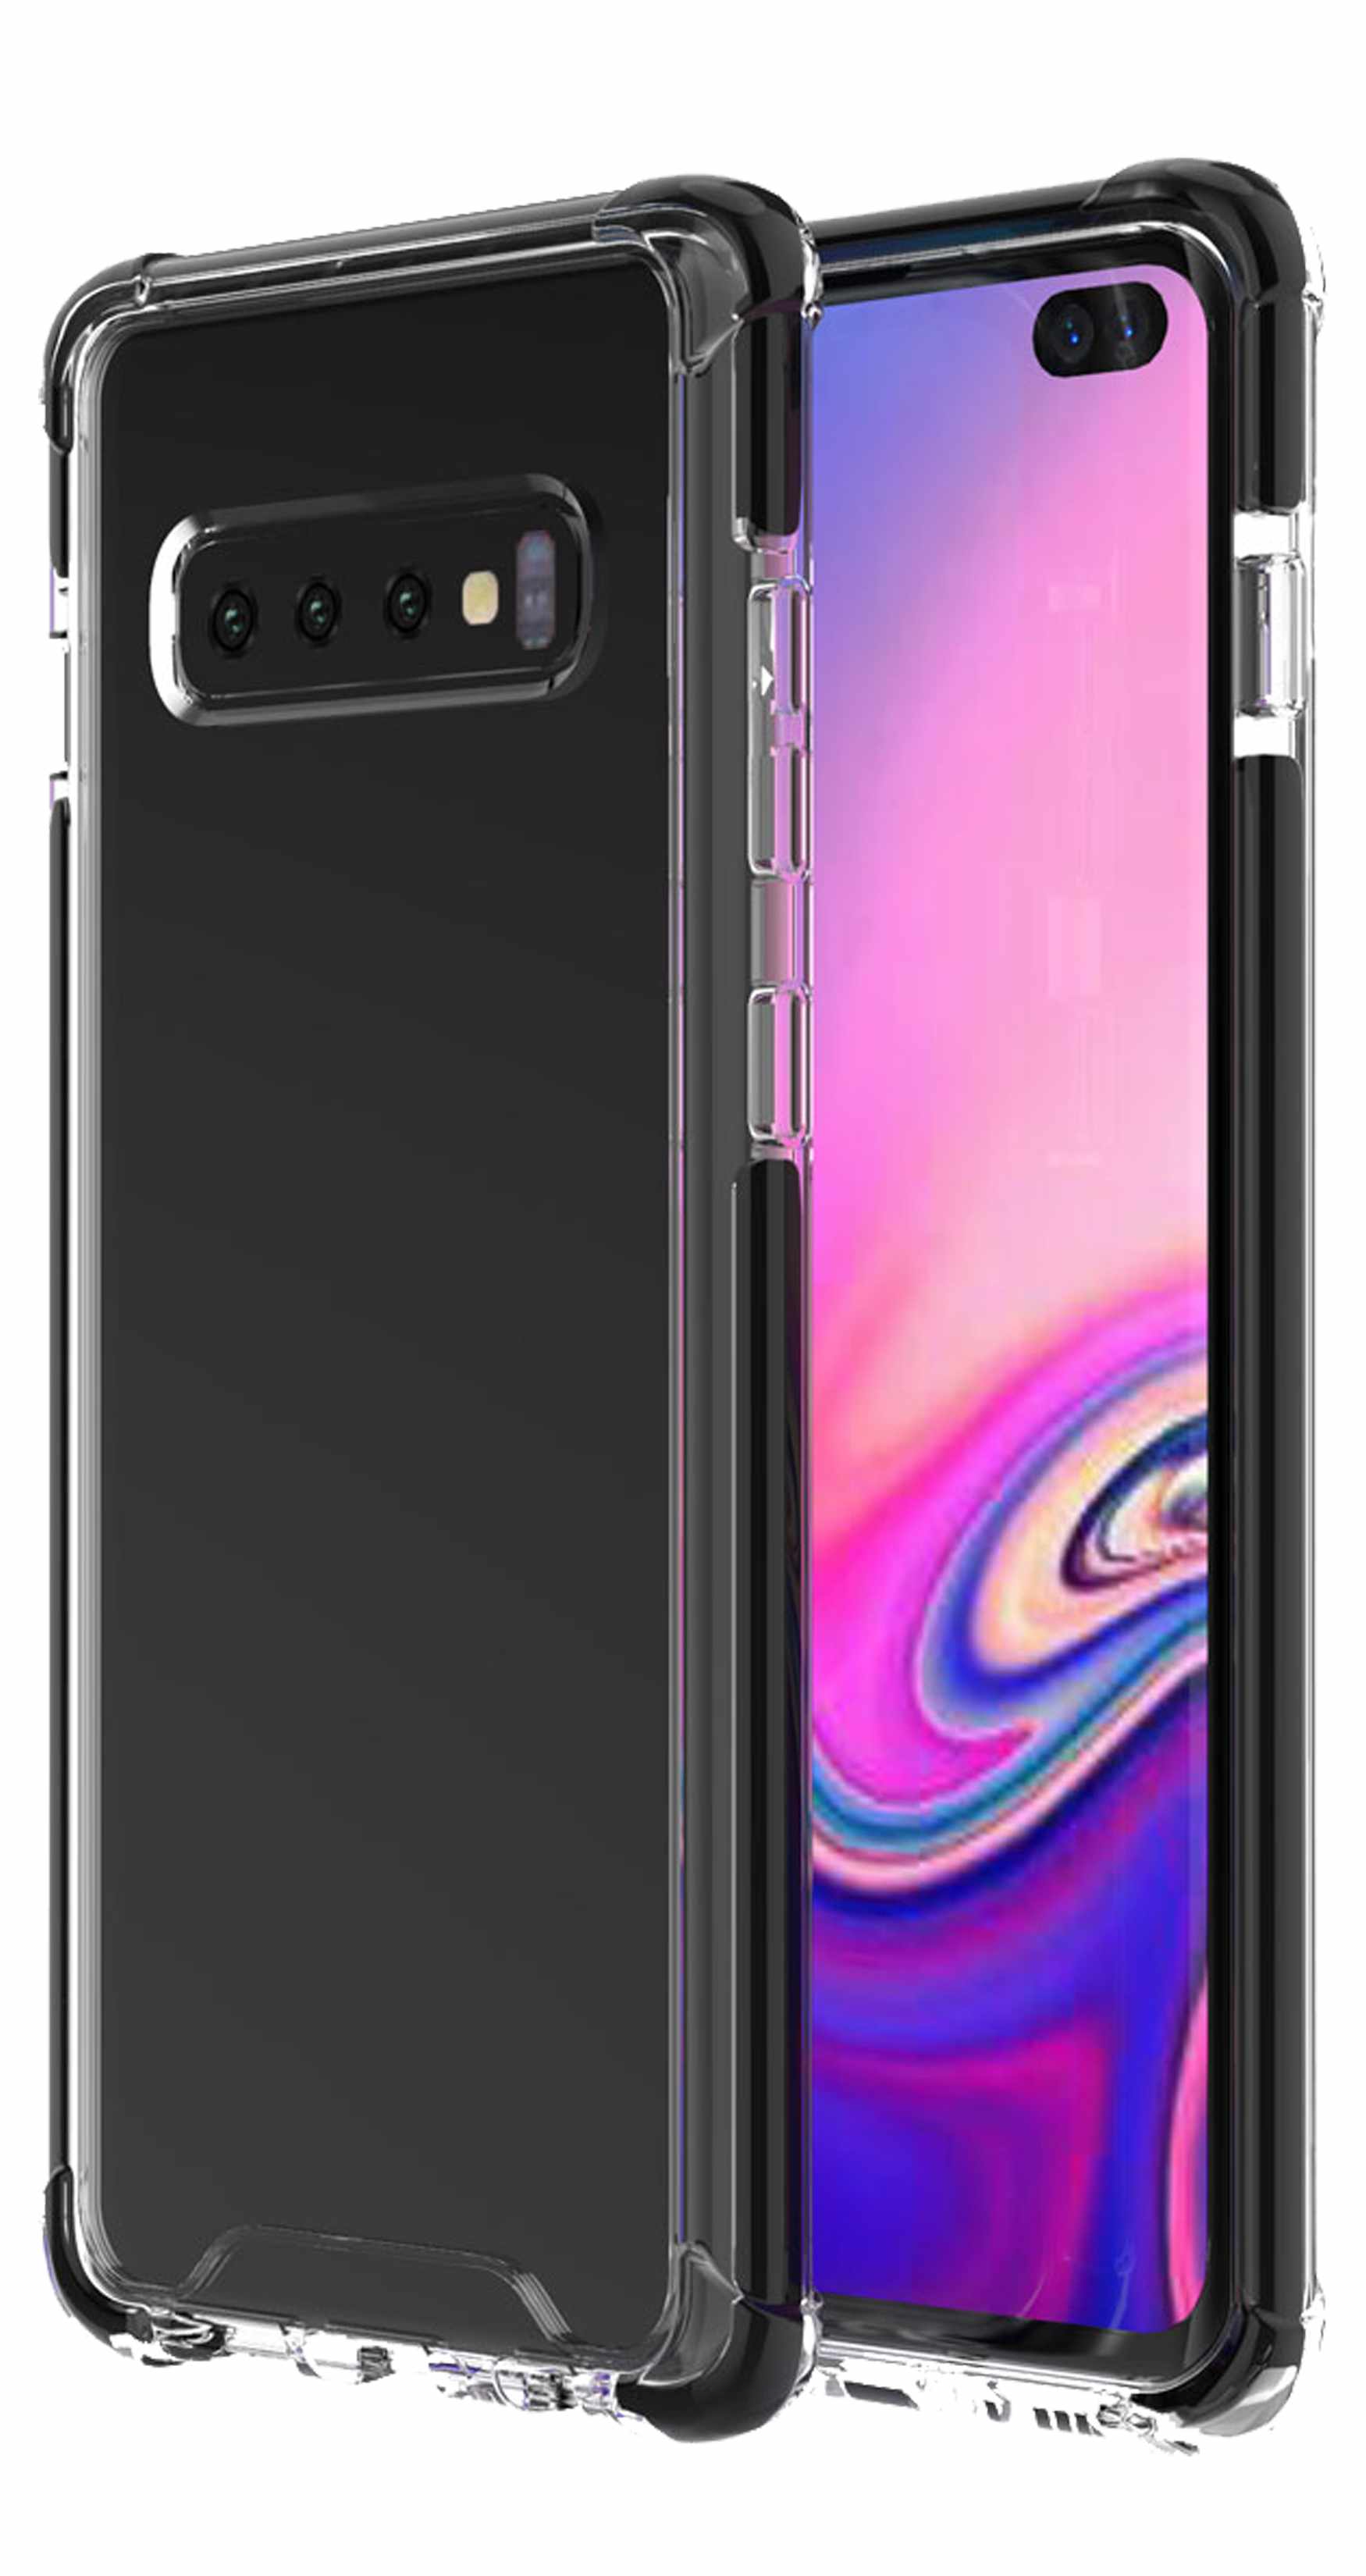 DropZone Rugged Case Black for Samsung Galaxy S10+